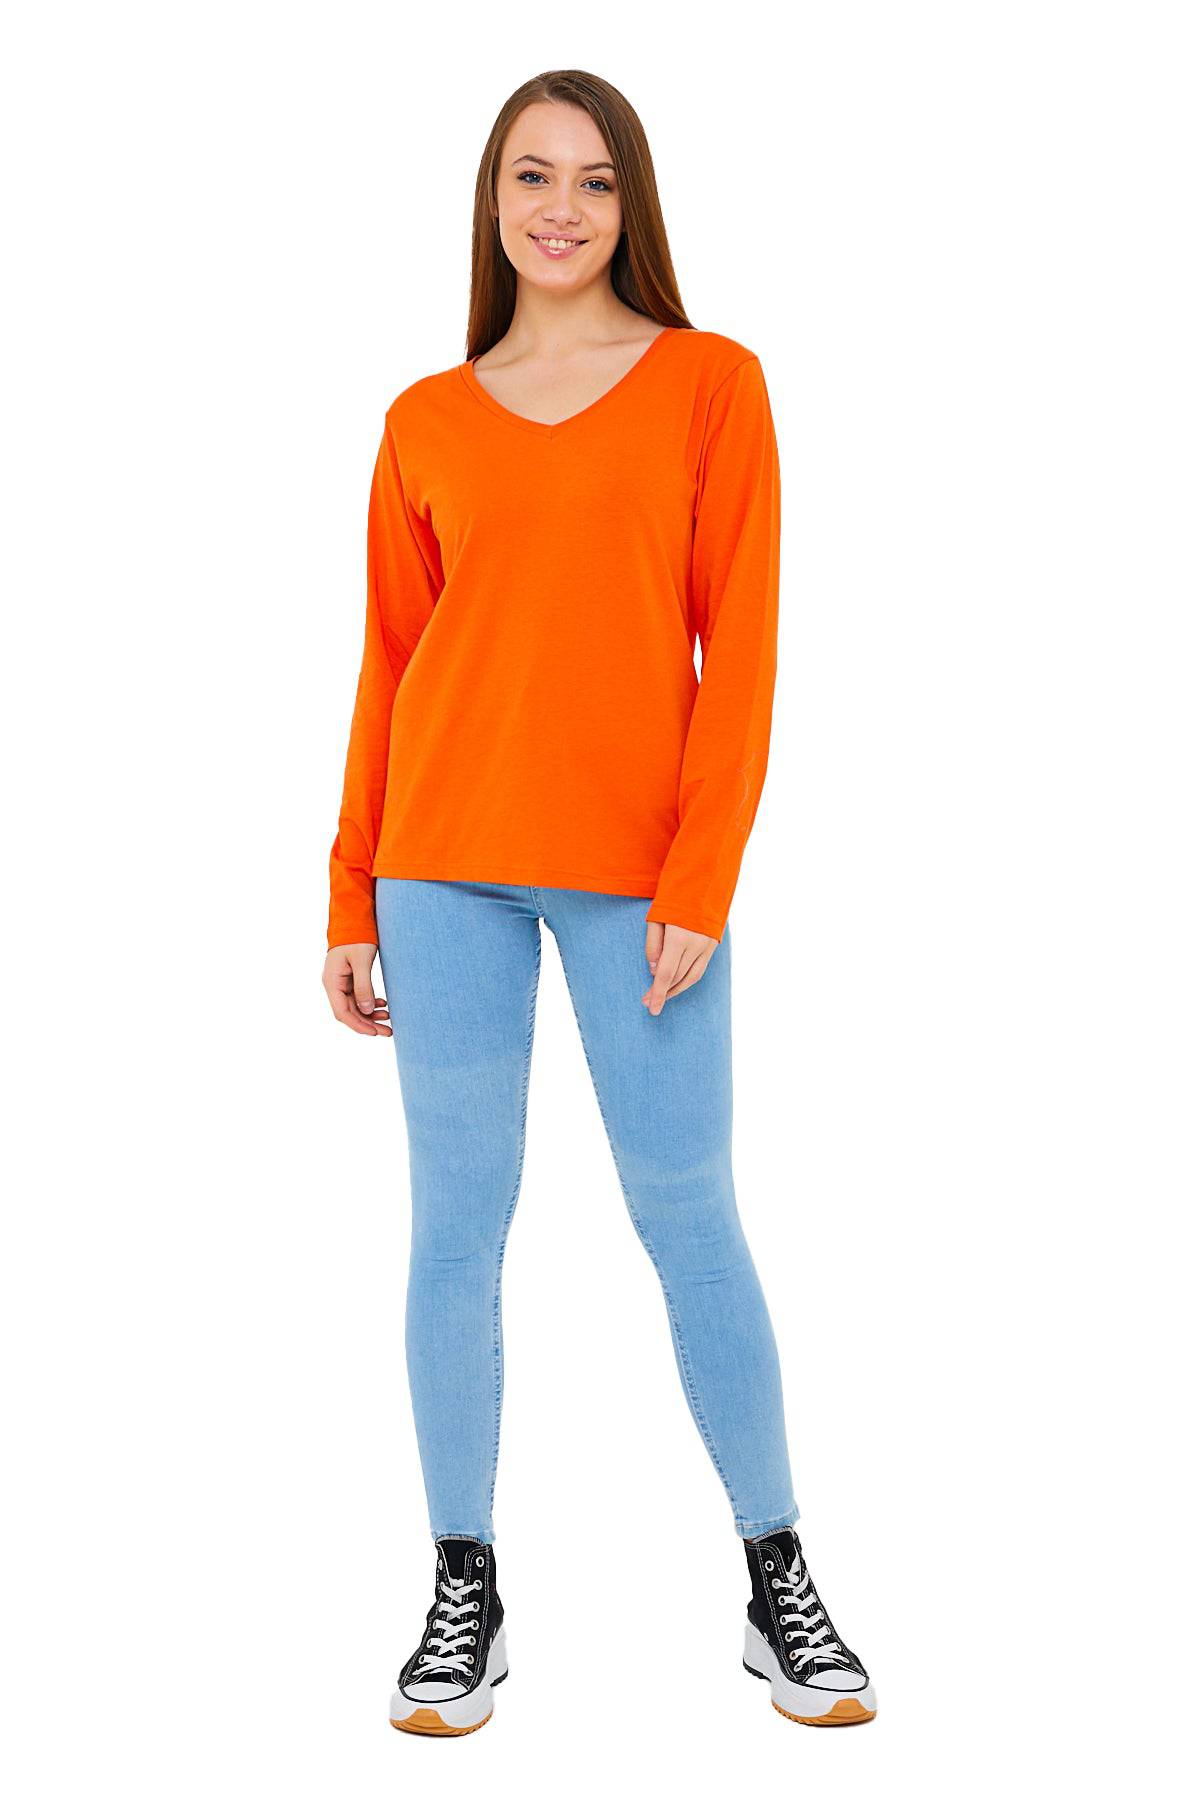 Shirts for Women Womens Long Sleeve T Shirt V Neck Loose Soft Knit Thermal  Top T Shirts for Women Polyester Spandex Cotton Orange Xl 